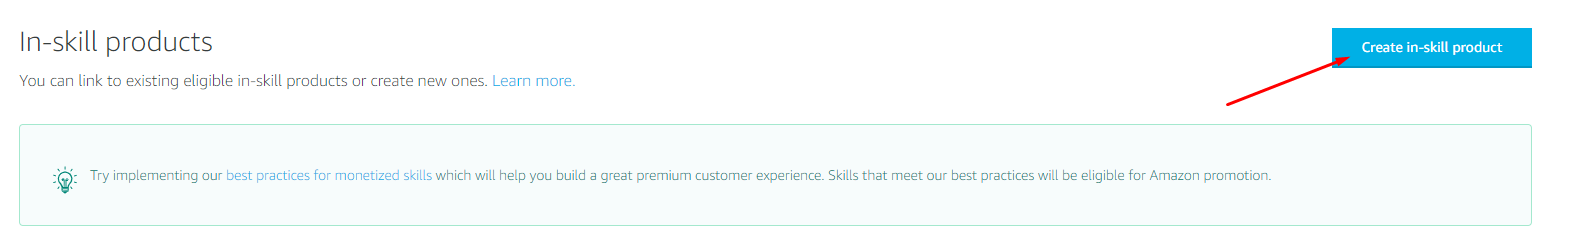 In skill products page